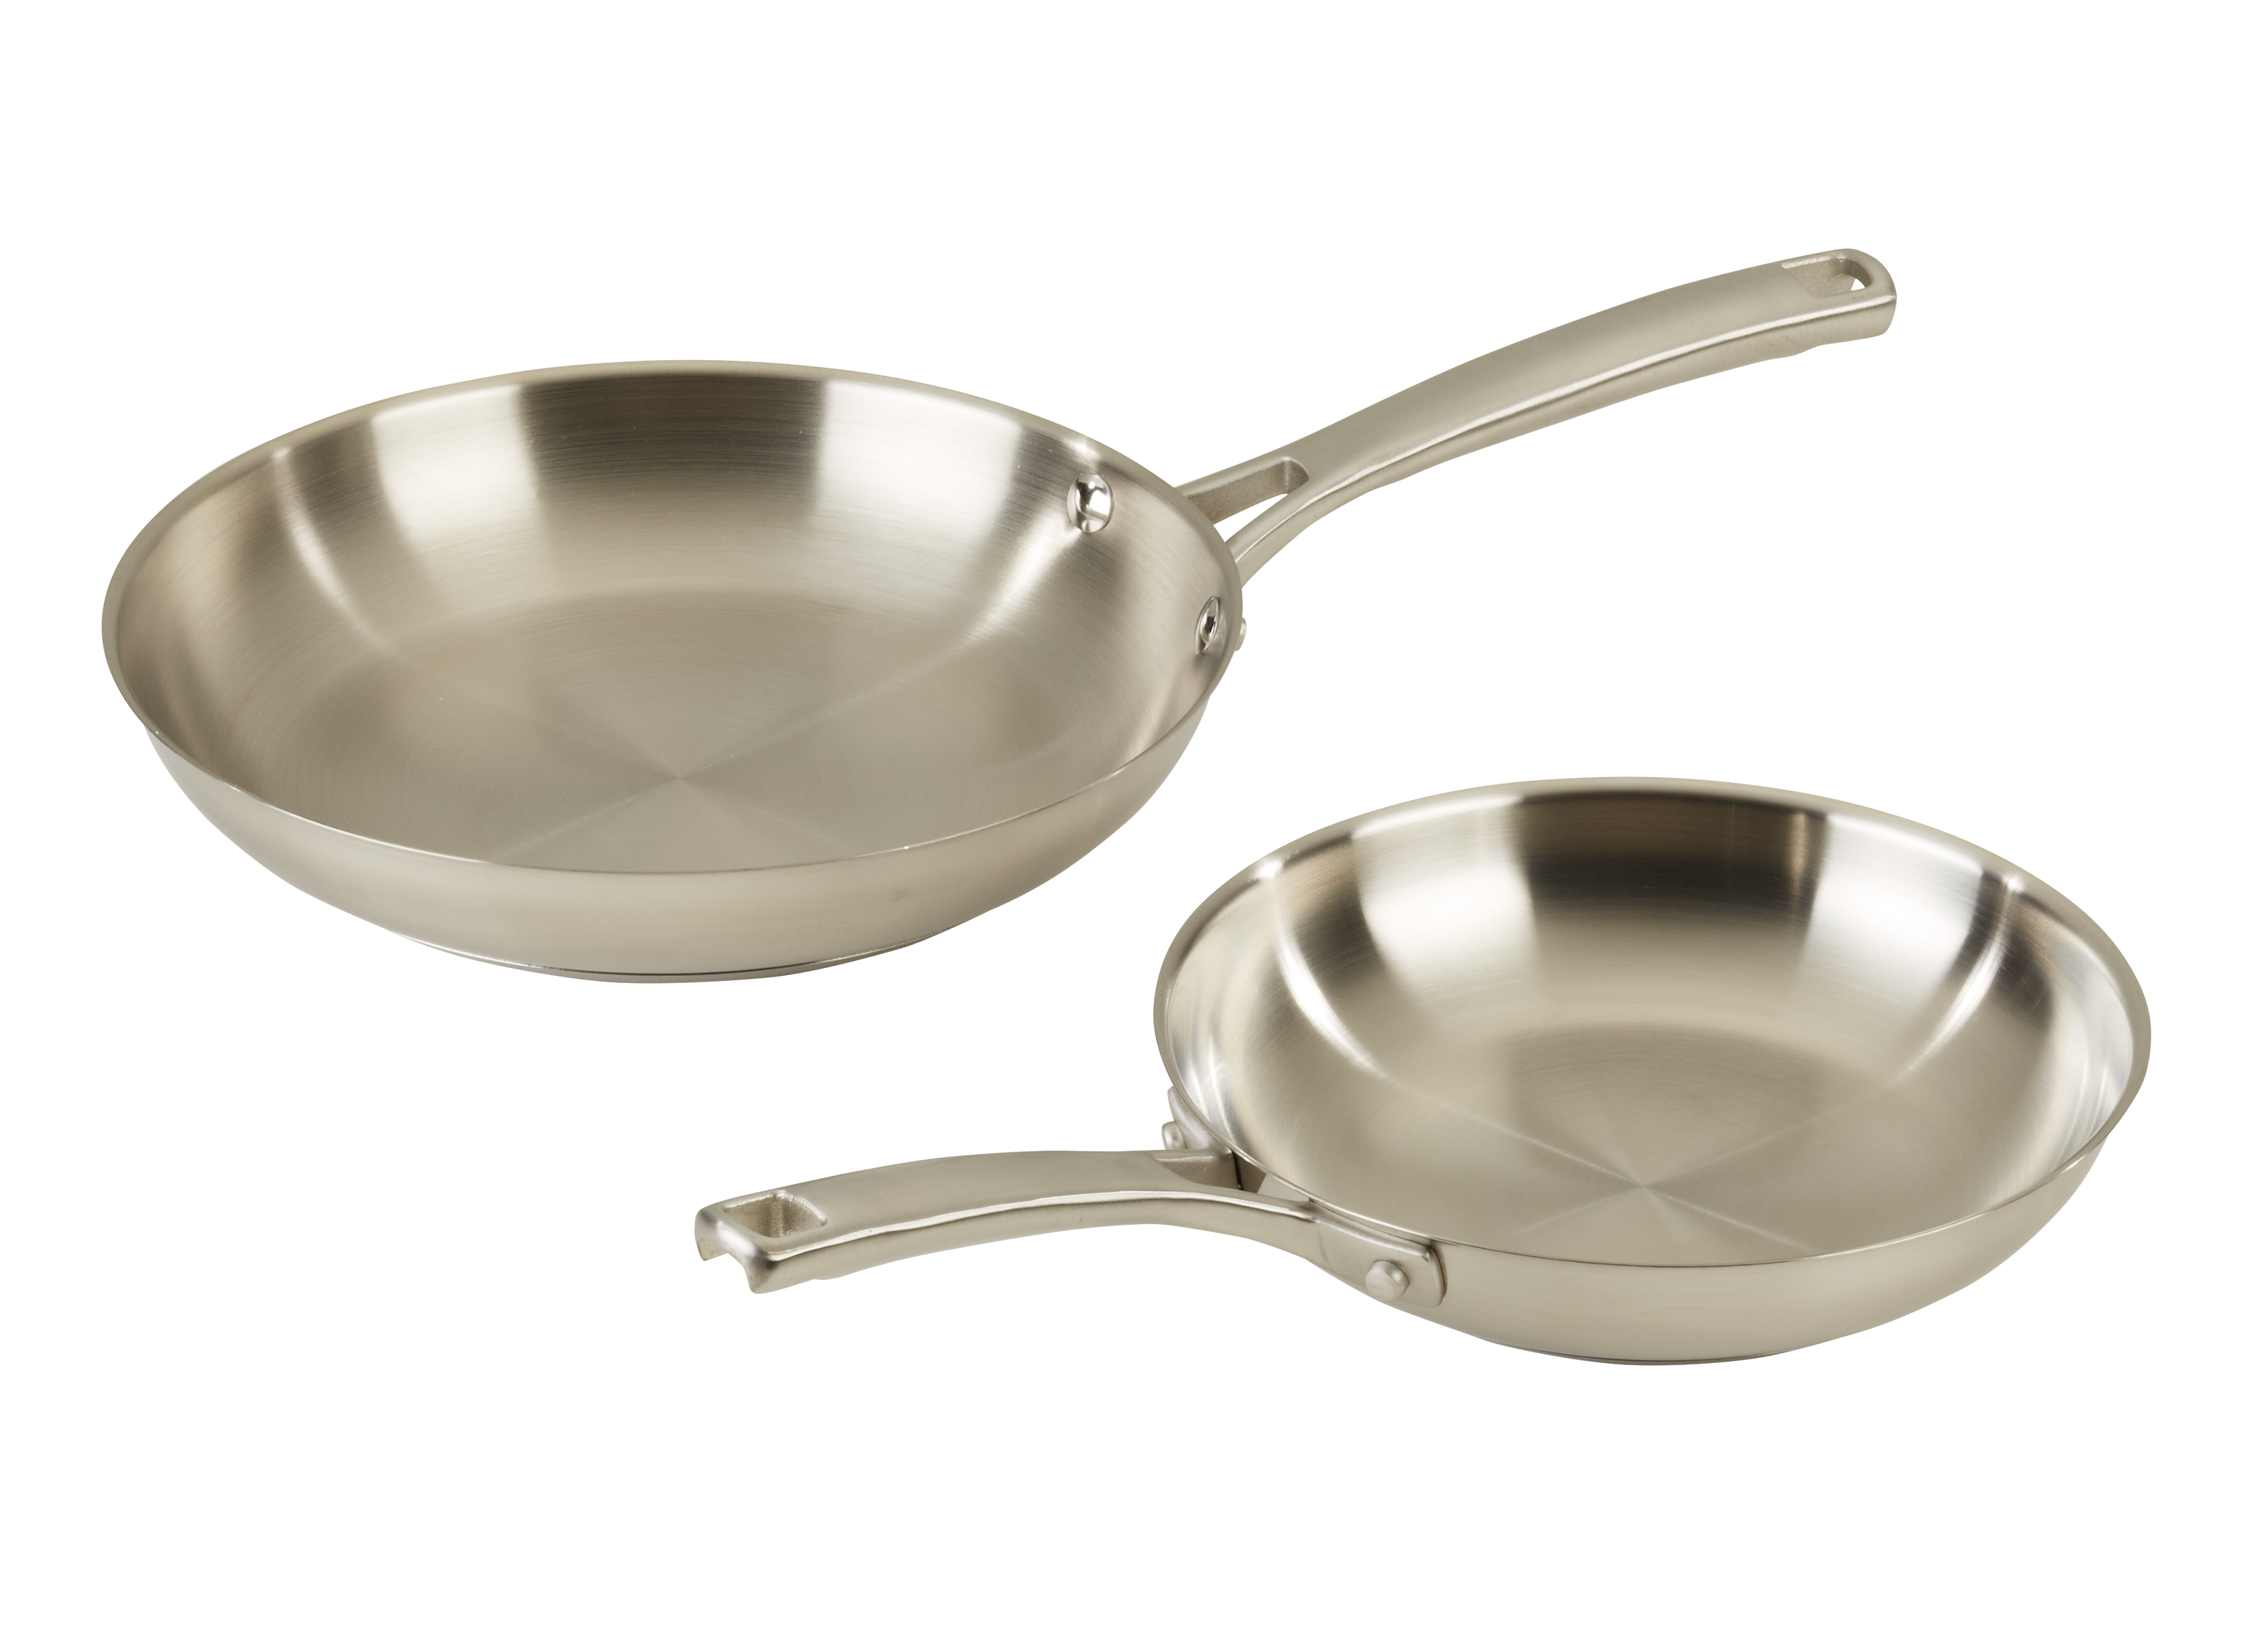 https://crdms.images.consumerreports.org/prod/products/cr/models/393393-fryingpans-calphalon-classicstainlesssteel.png